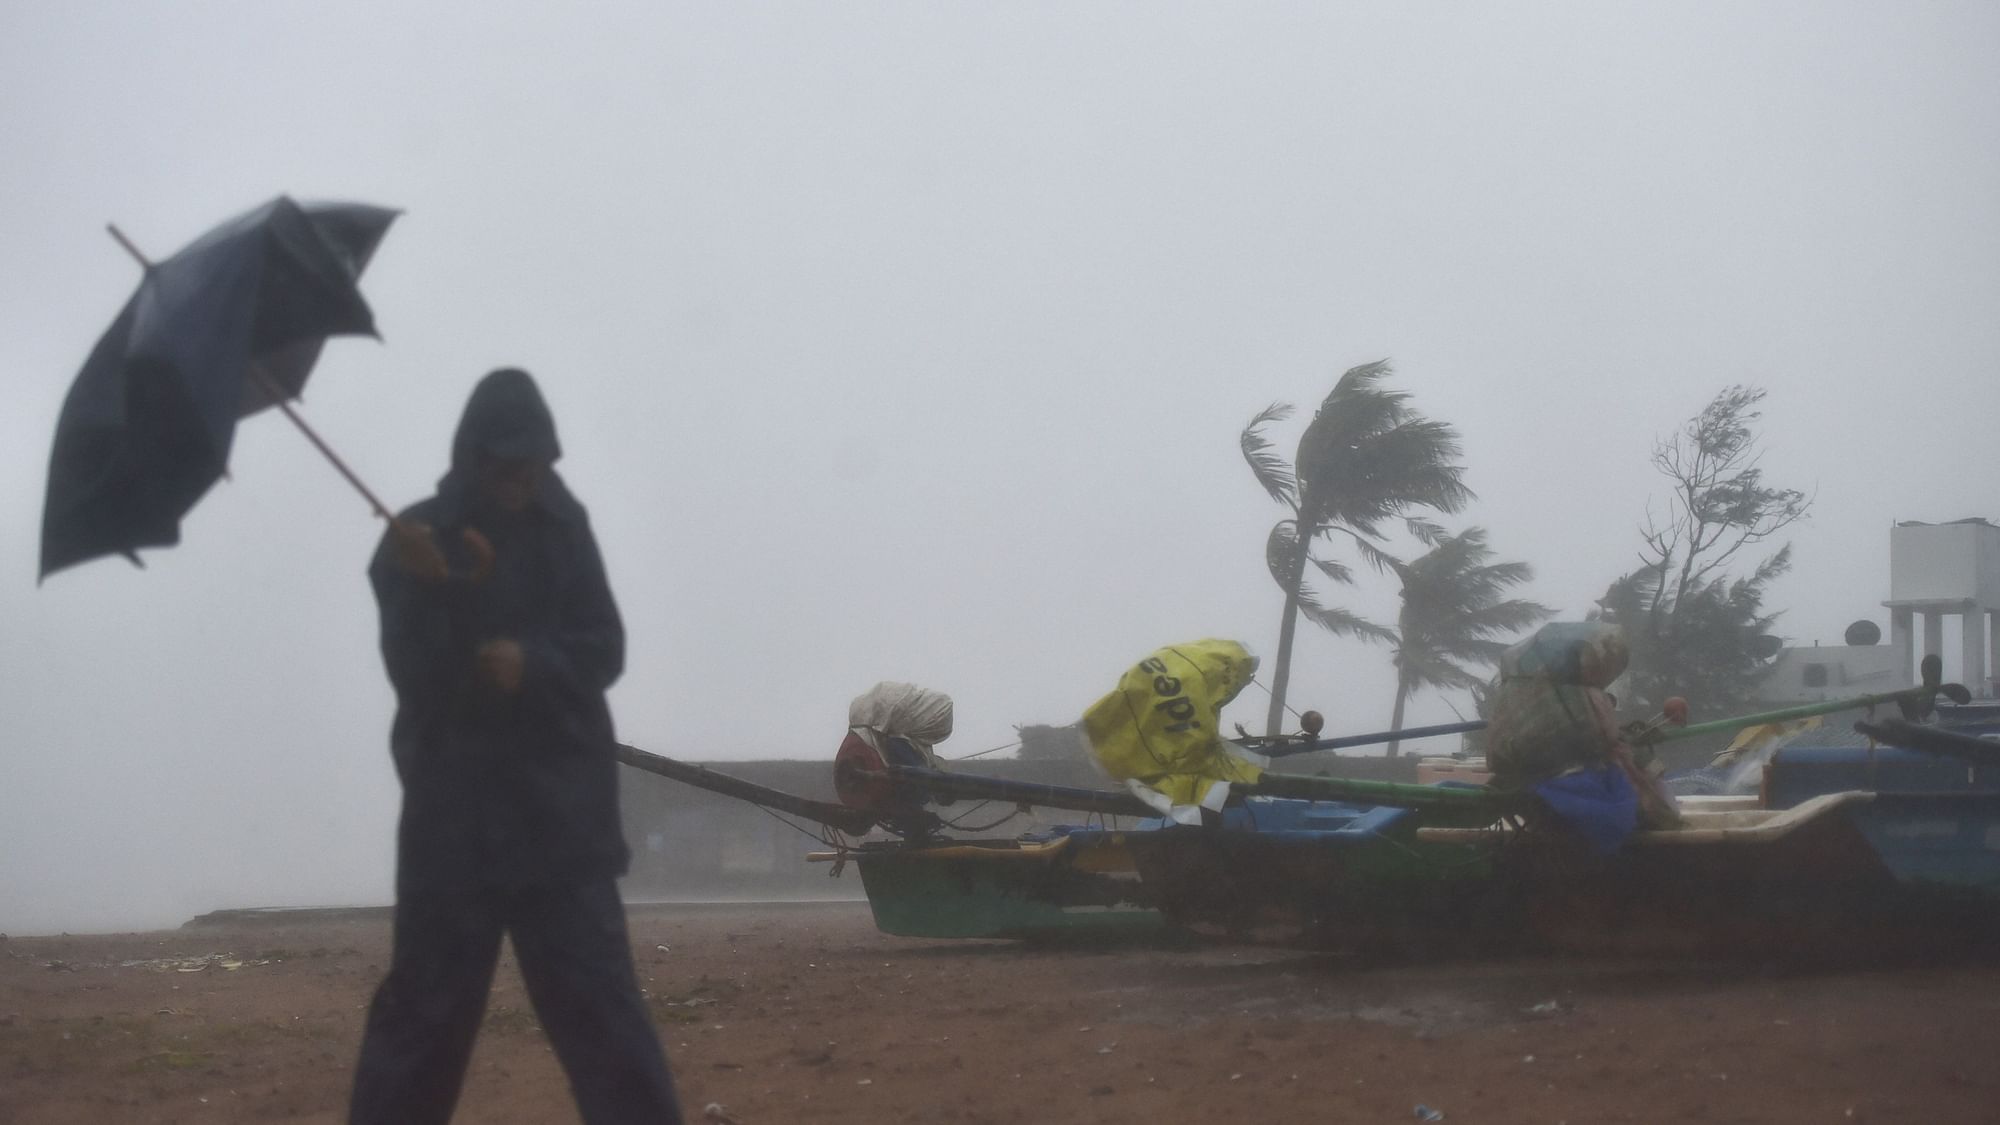 Fishermen move their boats to a safer place near Mamallapuram before the landfall of Cyclone Nivar.